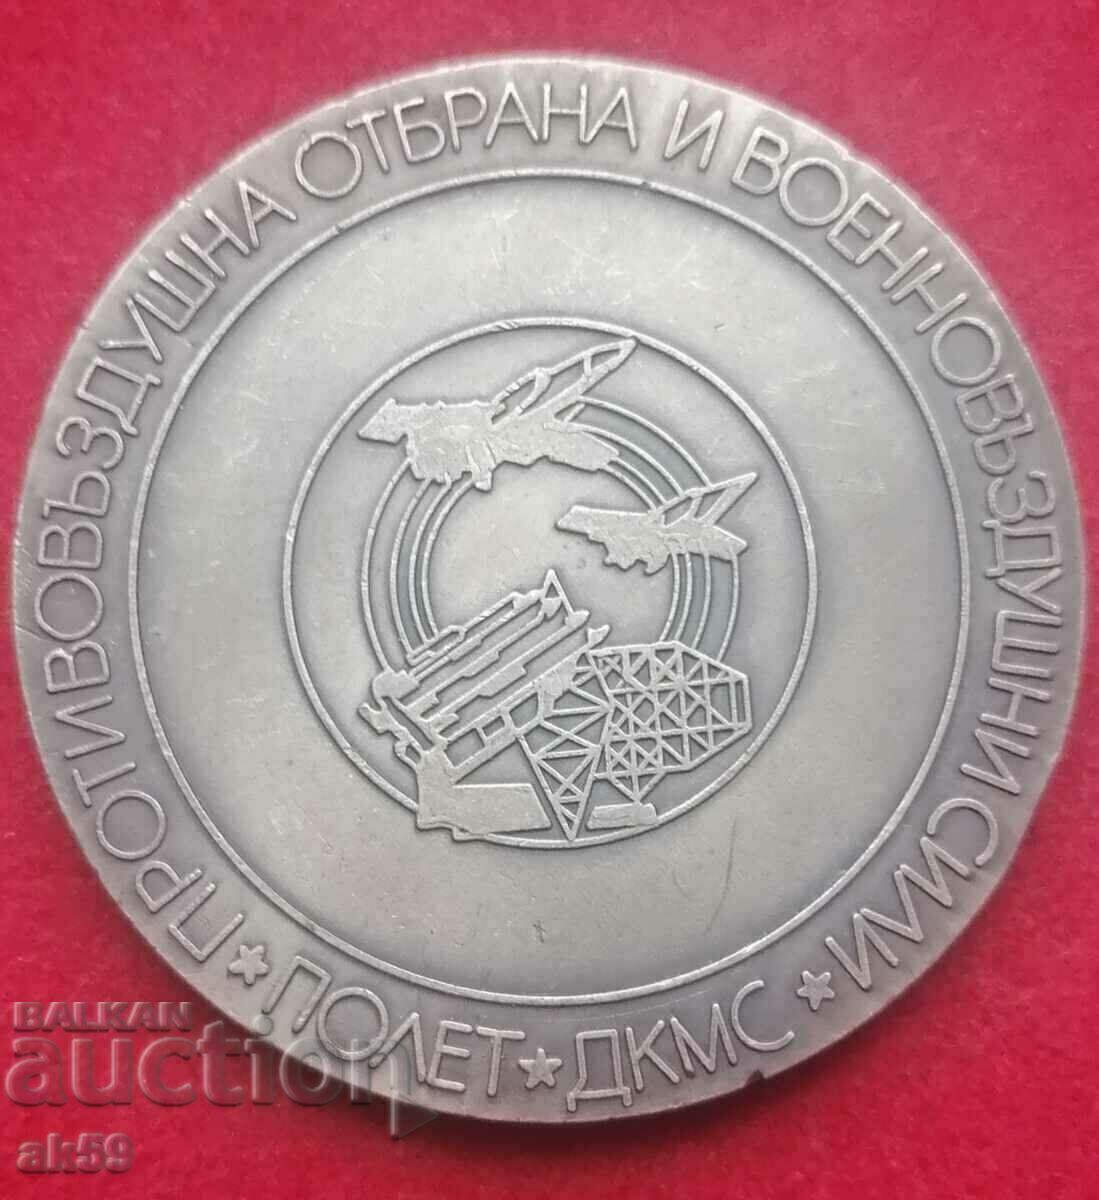 Plaque "Air Defense and Air Force - Flight DKMS"